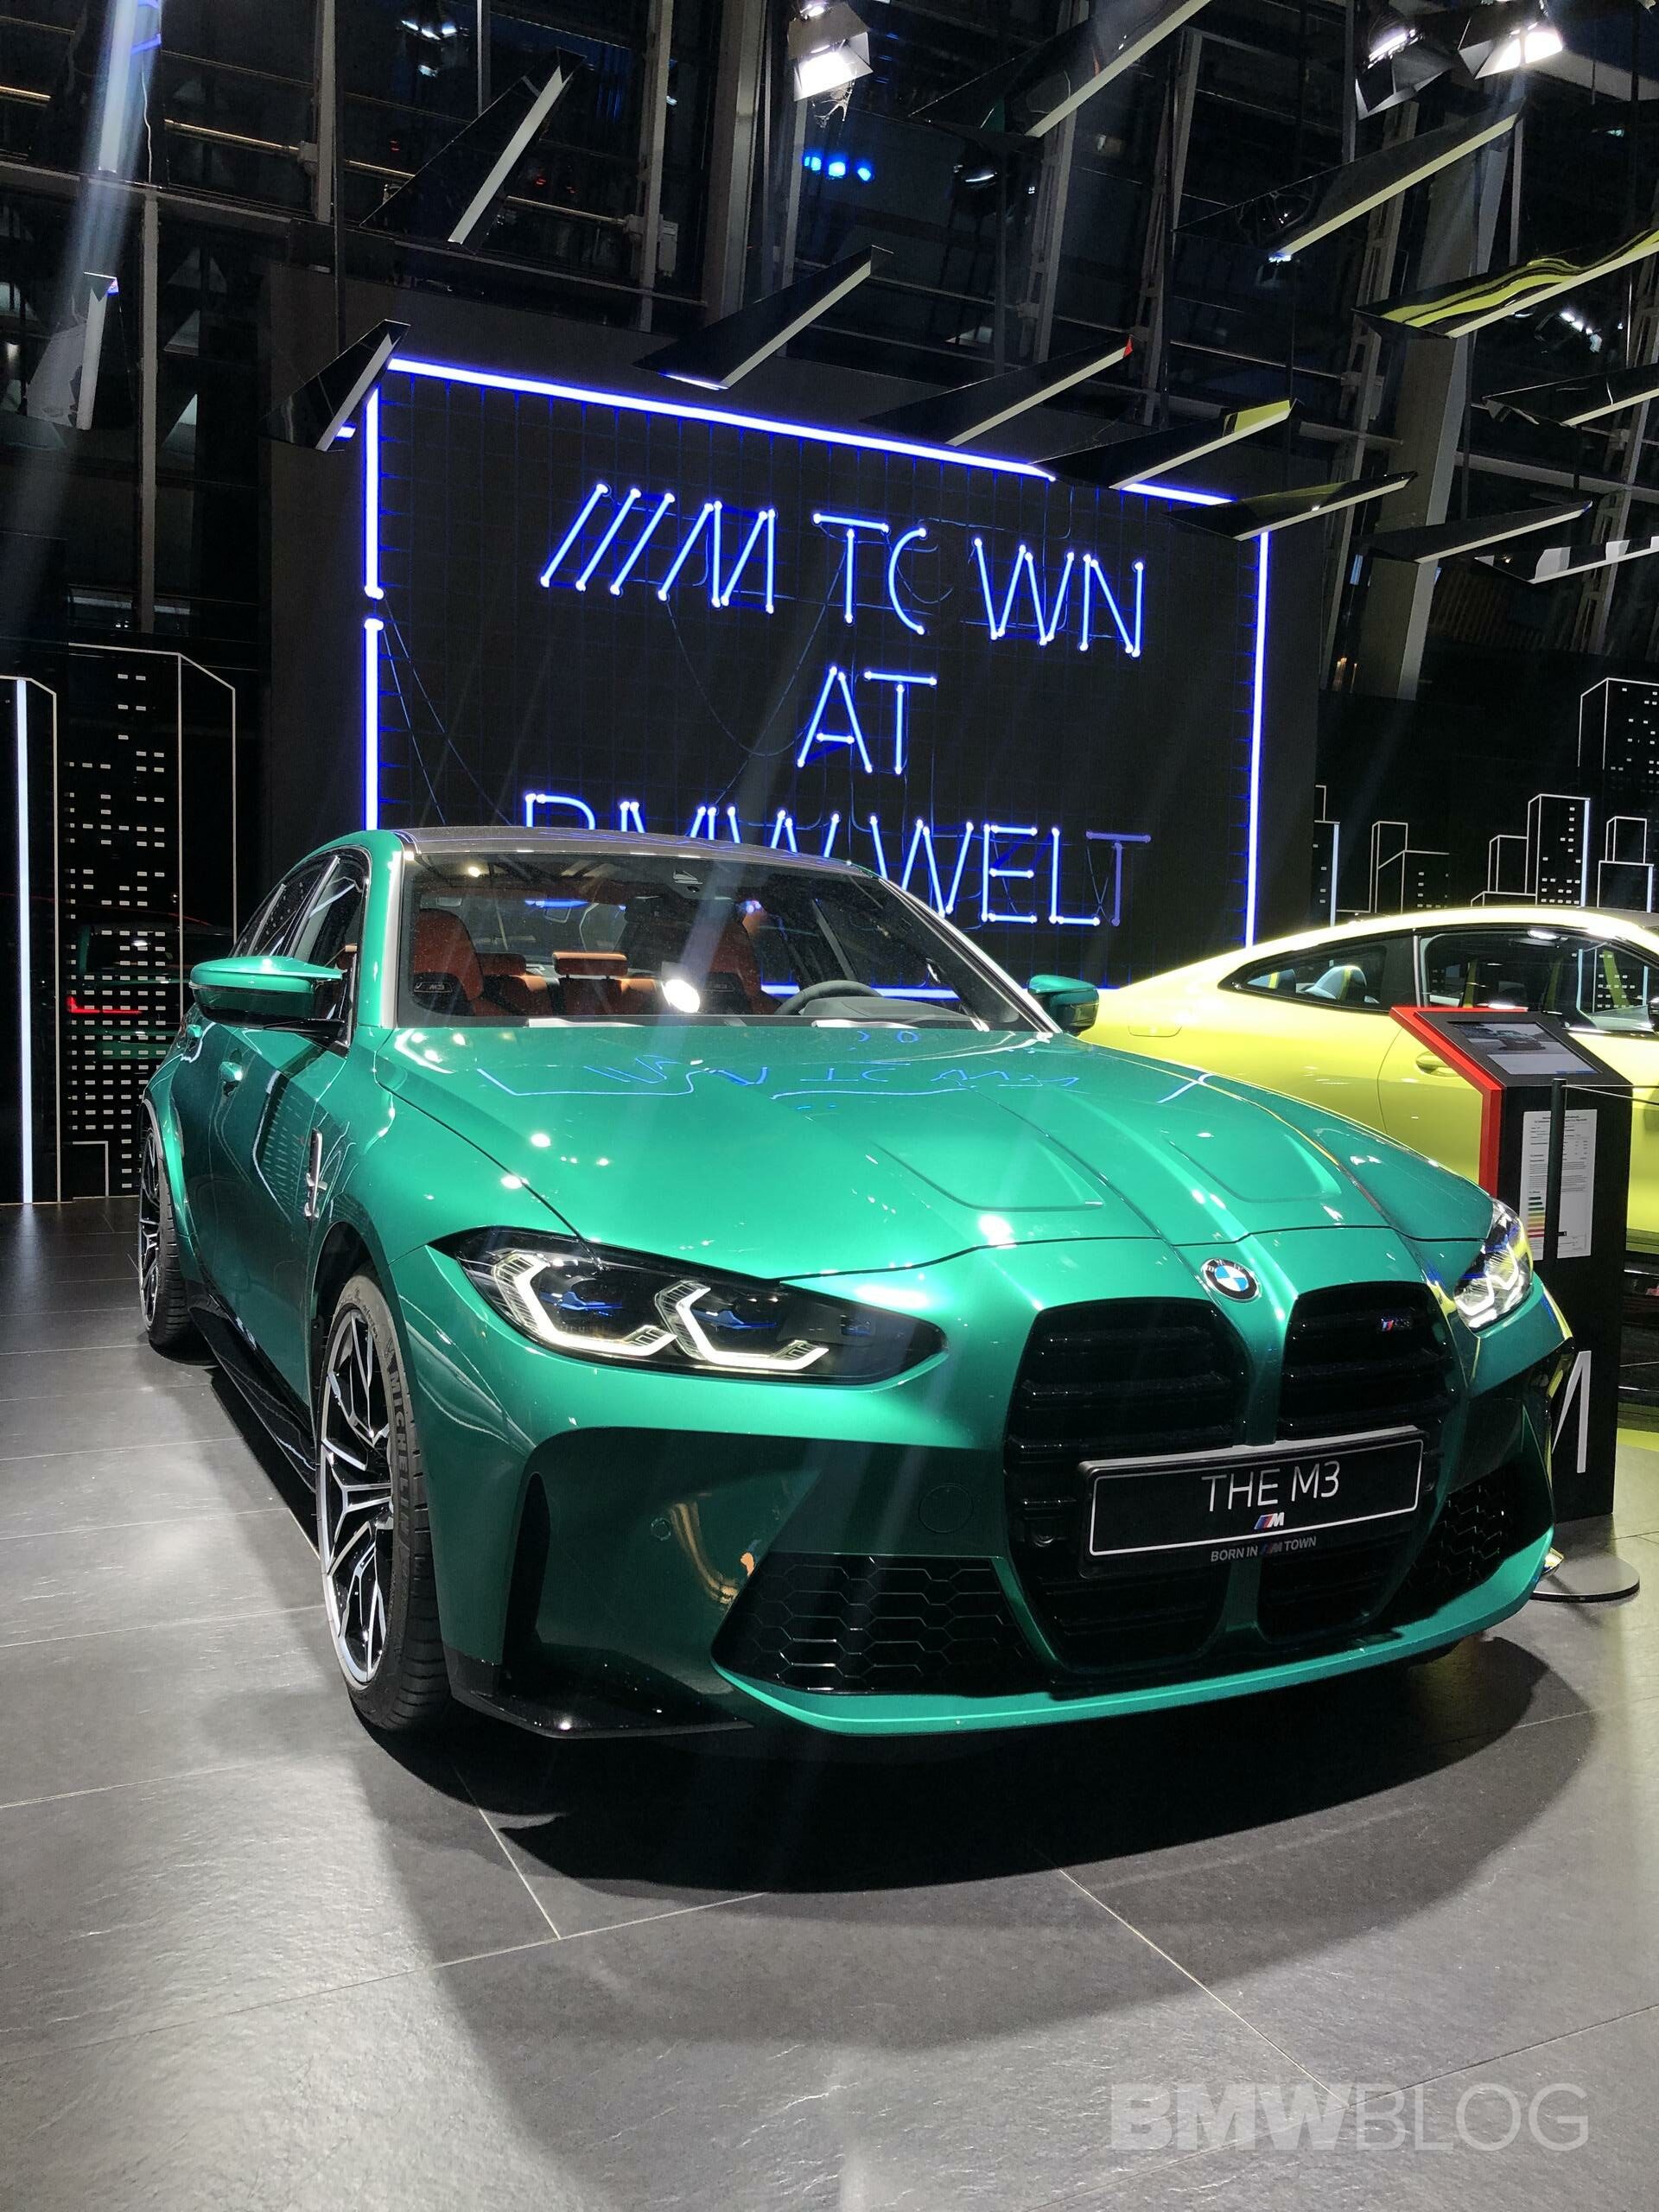 The new 2021 BMW M3 G80 displayed at the BMW Welt - VIDEO